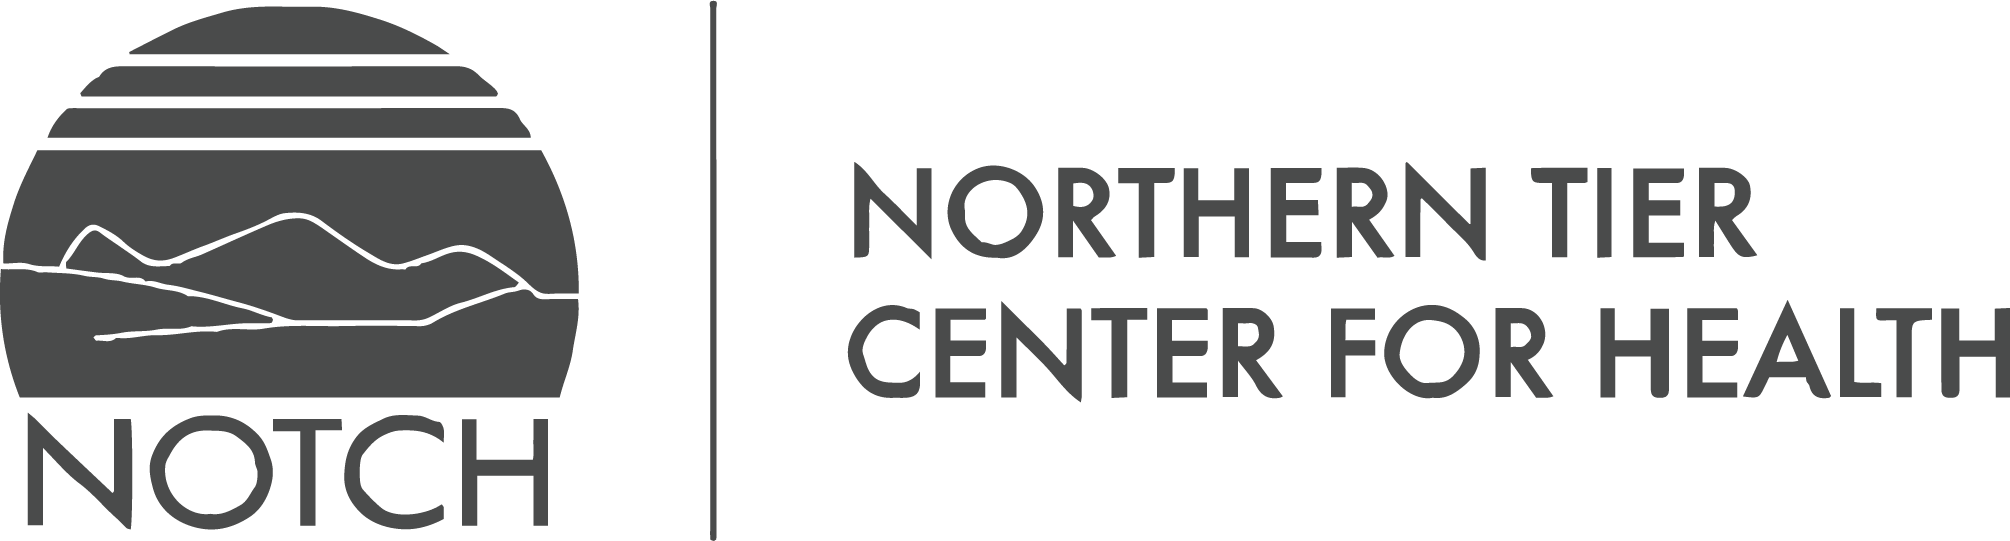 Northern Tier Center For Health logo colorless